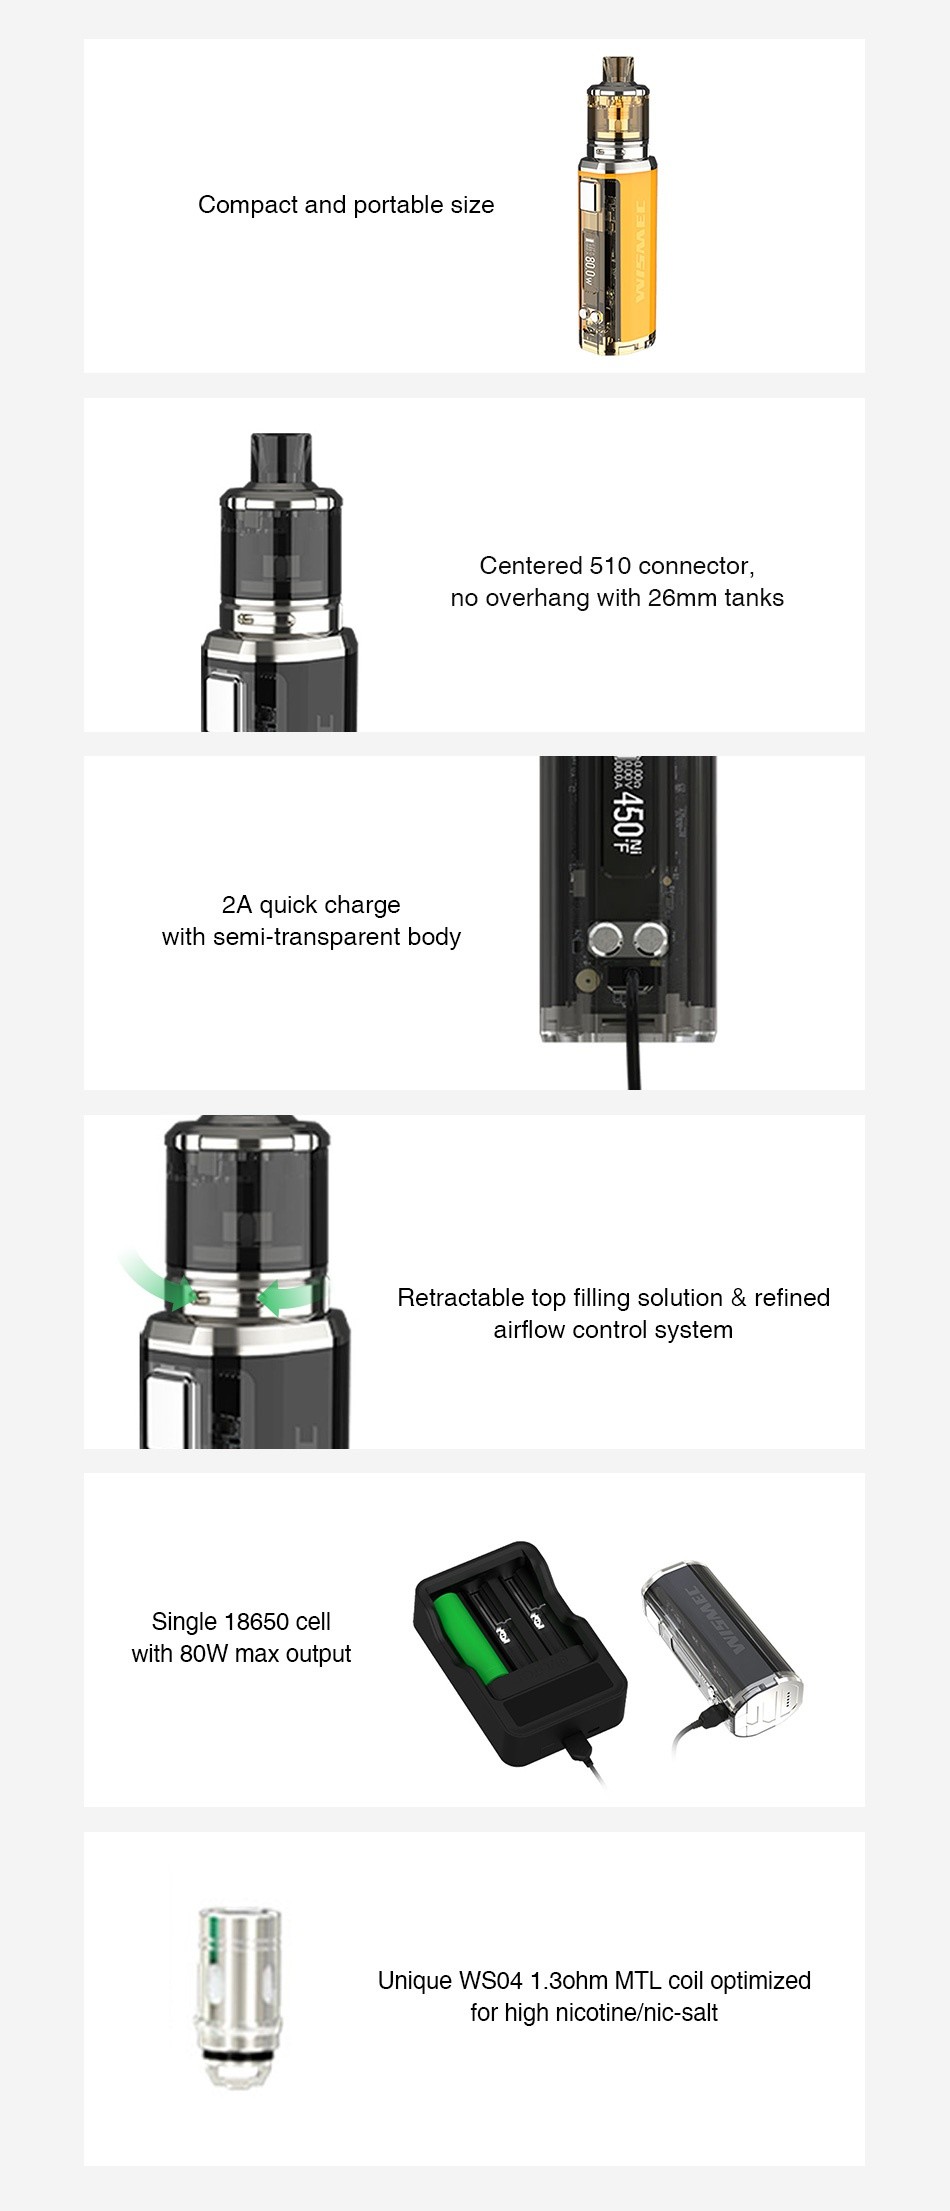 WISMEC SINUOUS V80 80W TC Kit with Amor NSE Compact and portable size Centered 510 connector no overhang with 26mm tanks 2A quick charge with semi transparent body Retractable top filling solution retined airflow control system single 18650 cell with 80W max output Unique WS04 1ohm MTL coil optimized for high nicotine nic salt